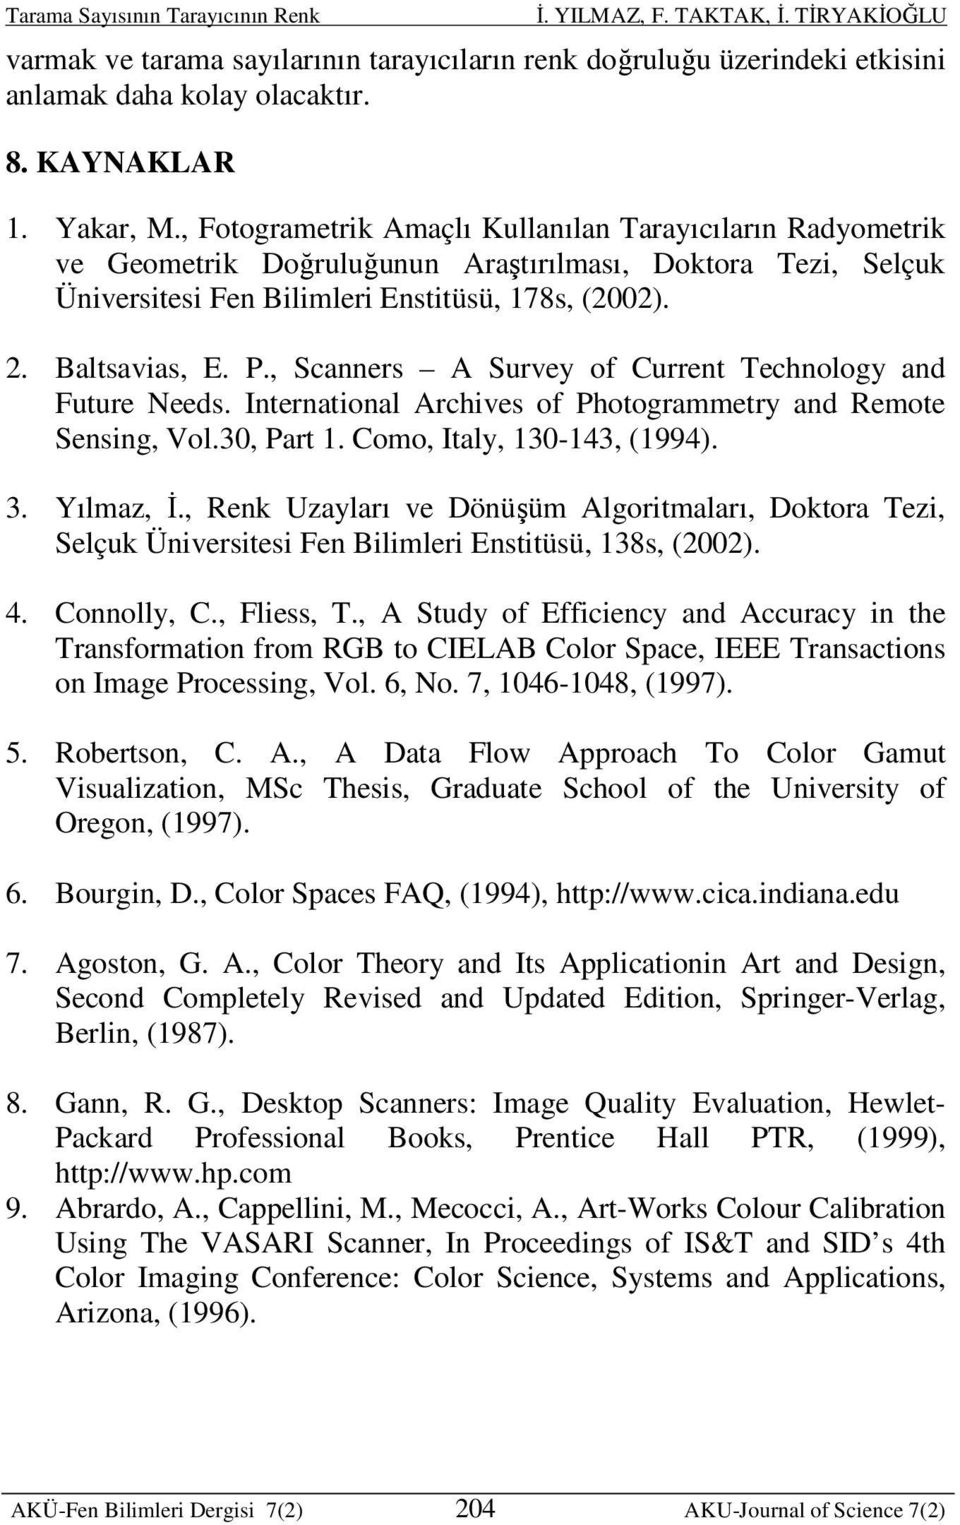 , Scanners A Survey of Current Technology and Future Needs. International Archives of Photogrammetry and Remote Sensing, Vol.30, Part 1. Como, Italy, 130-143, (1994). 3. Yılmaz, İ.